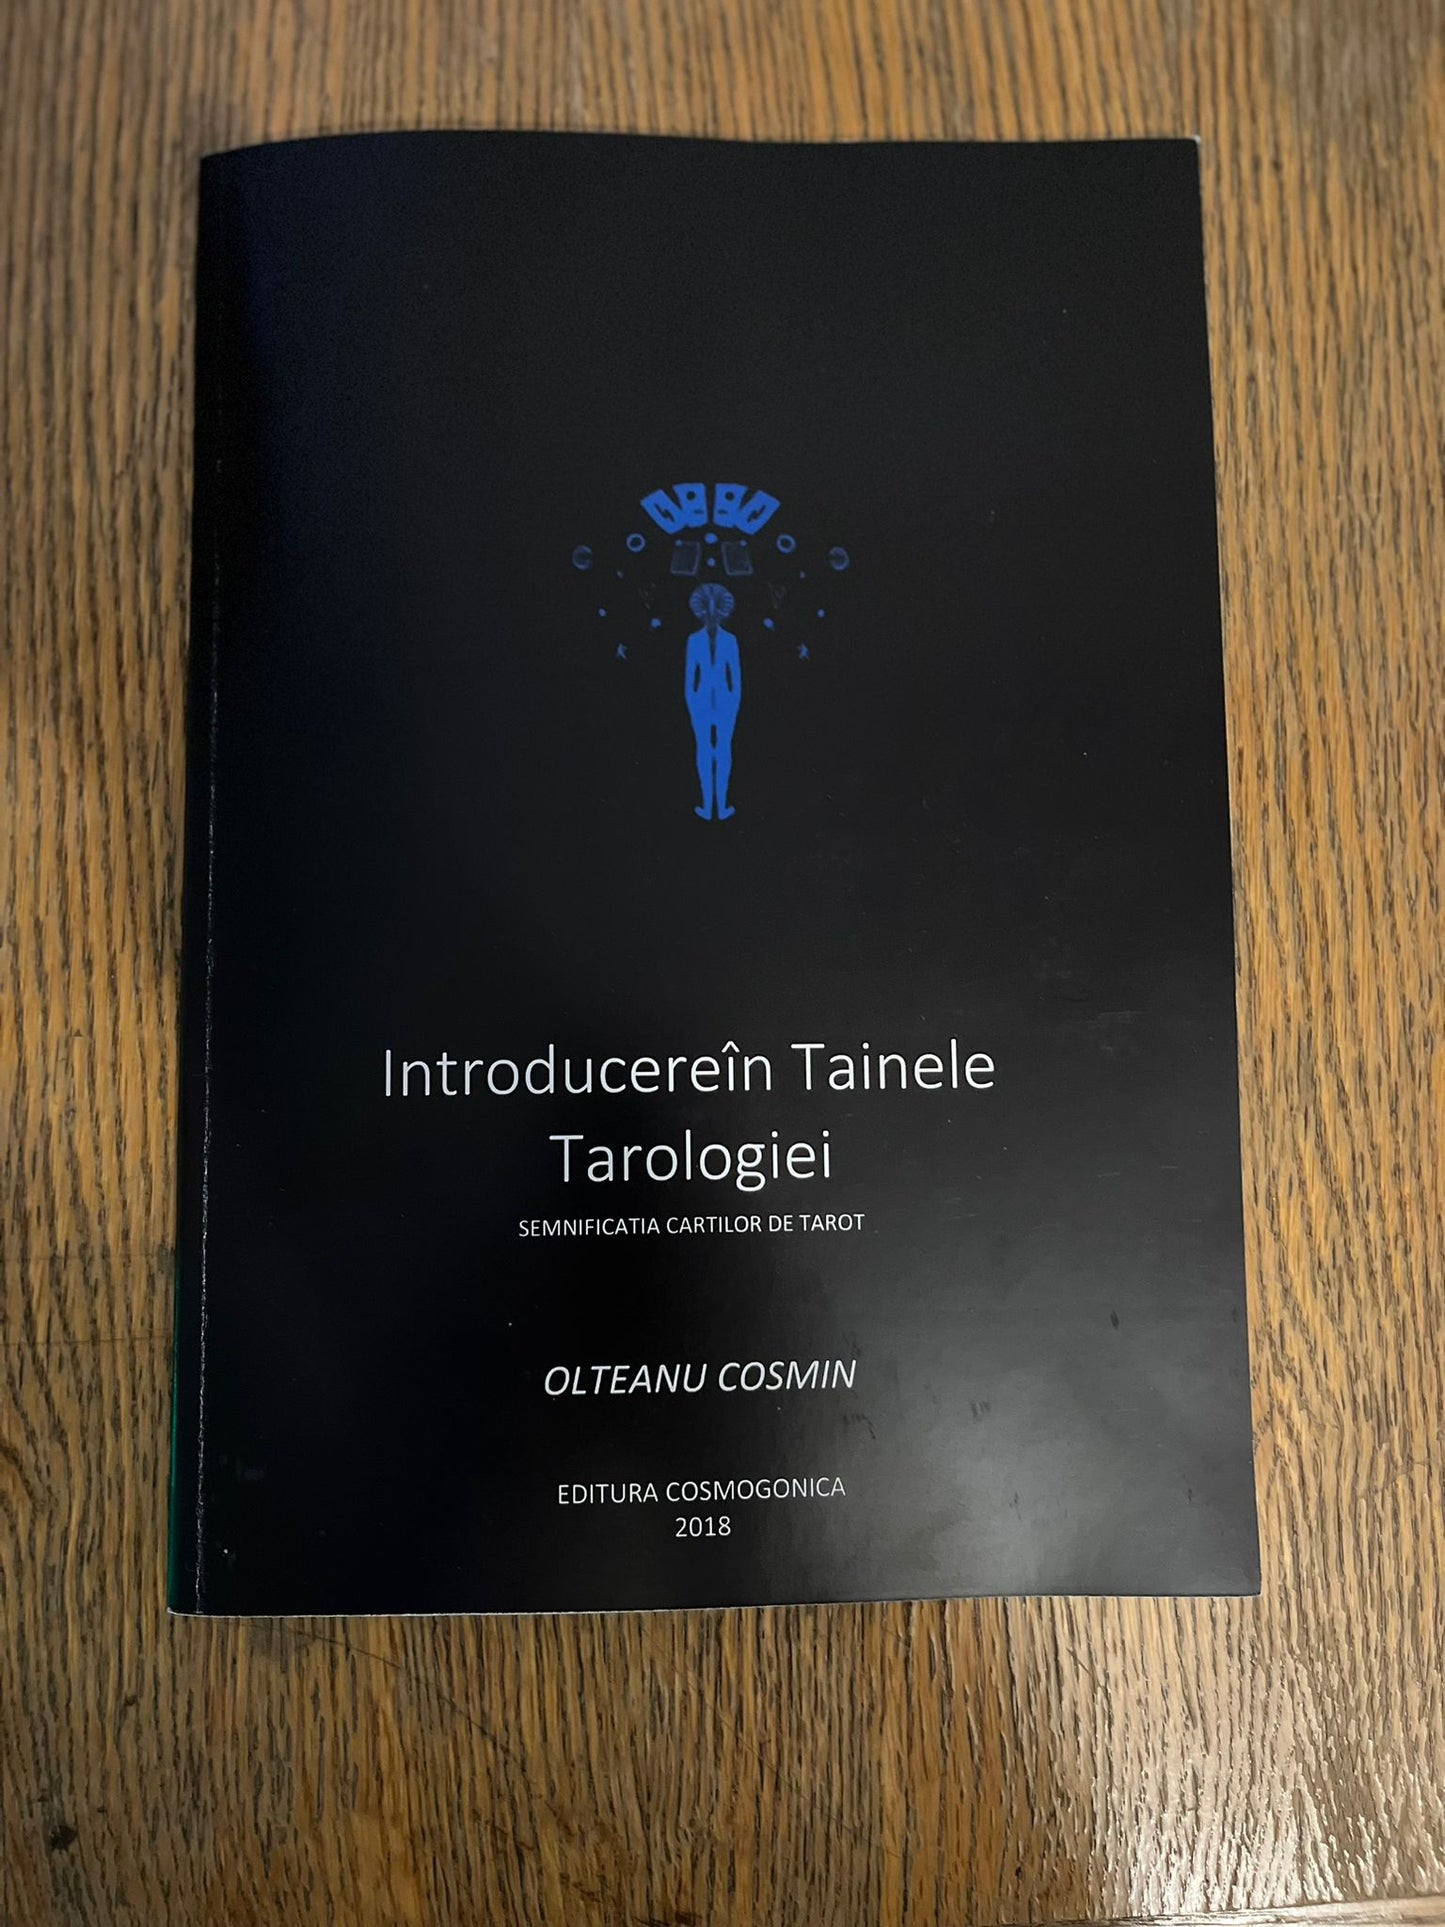 Book Introduction to Tarology by Olteanu Cosmin